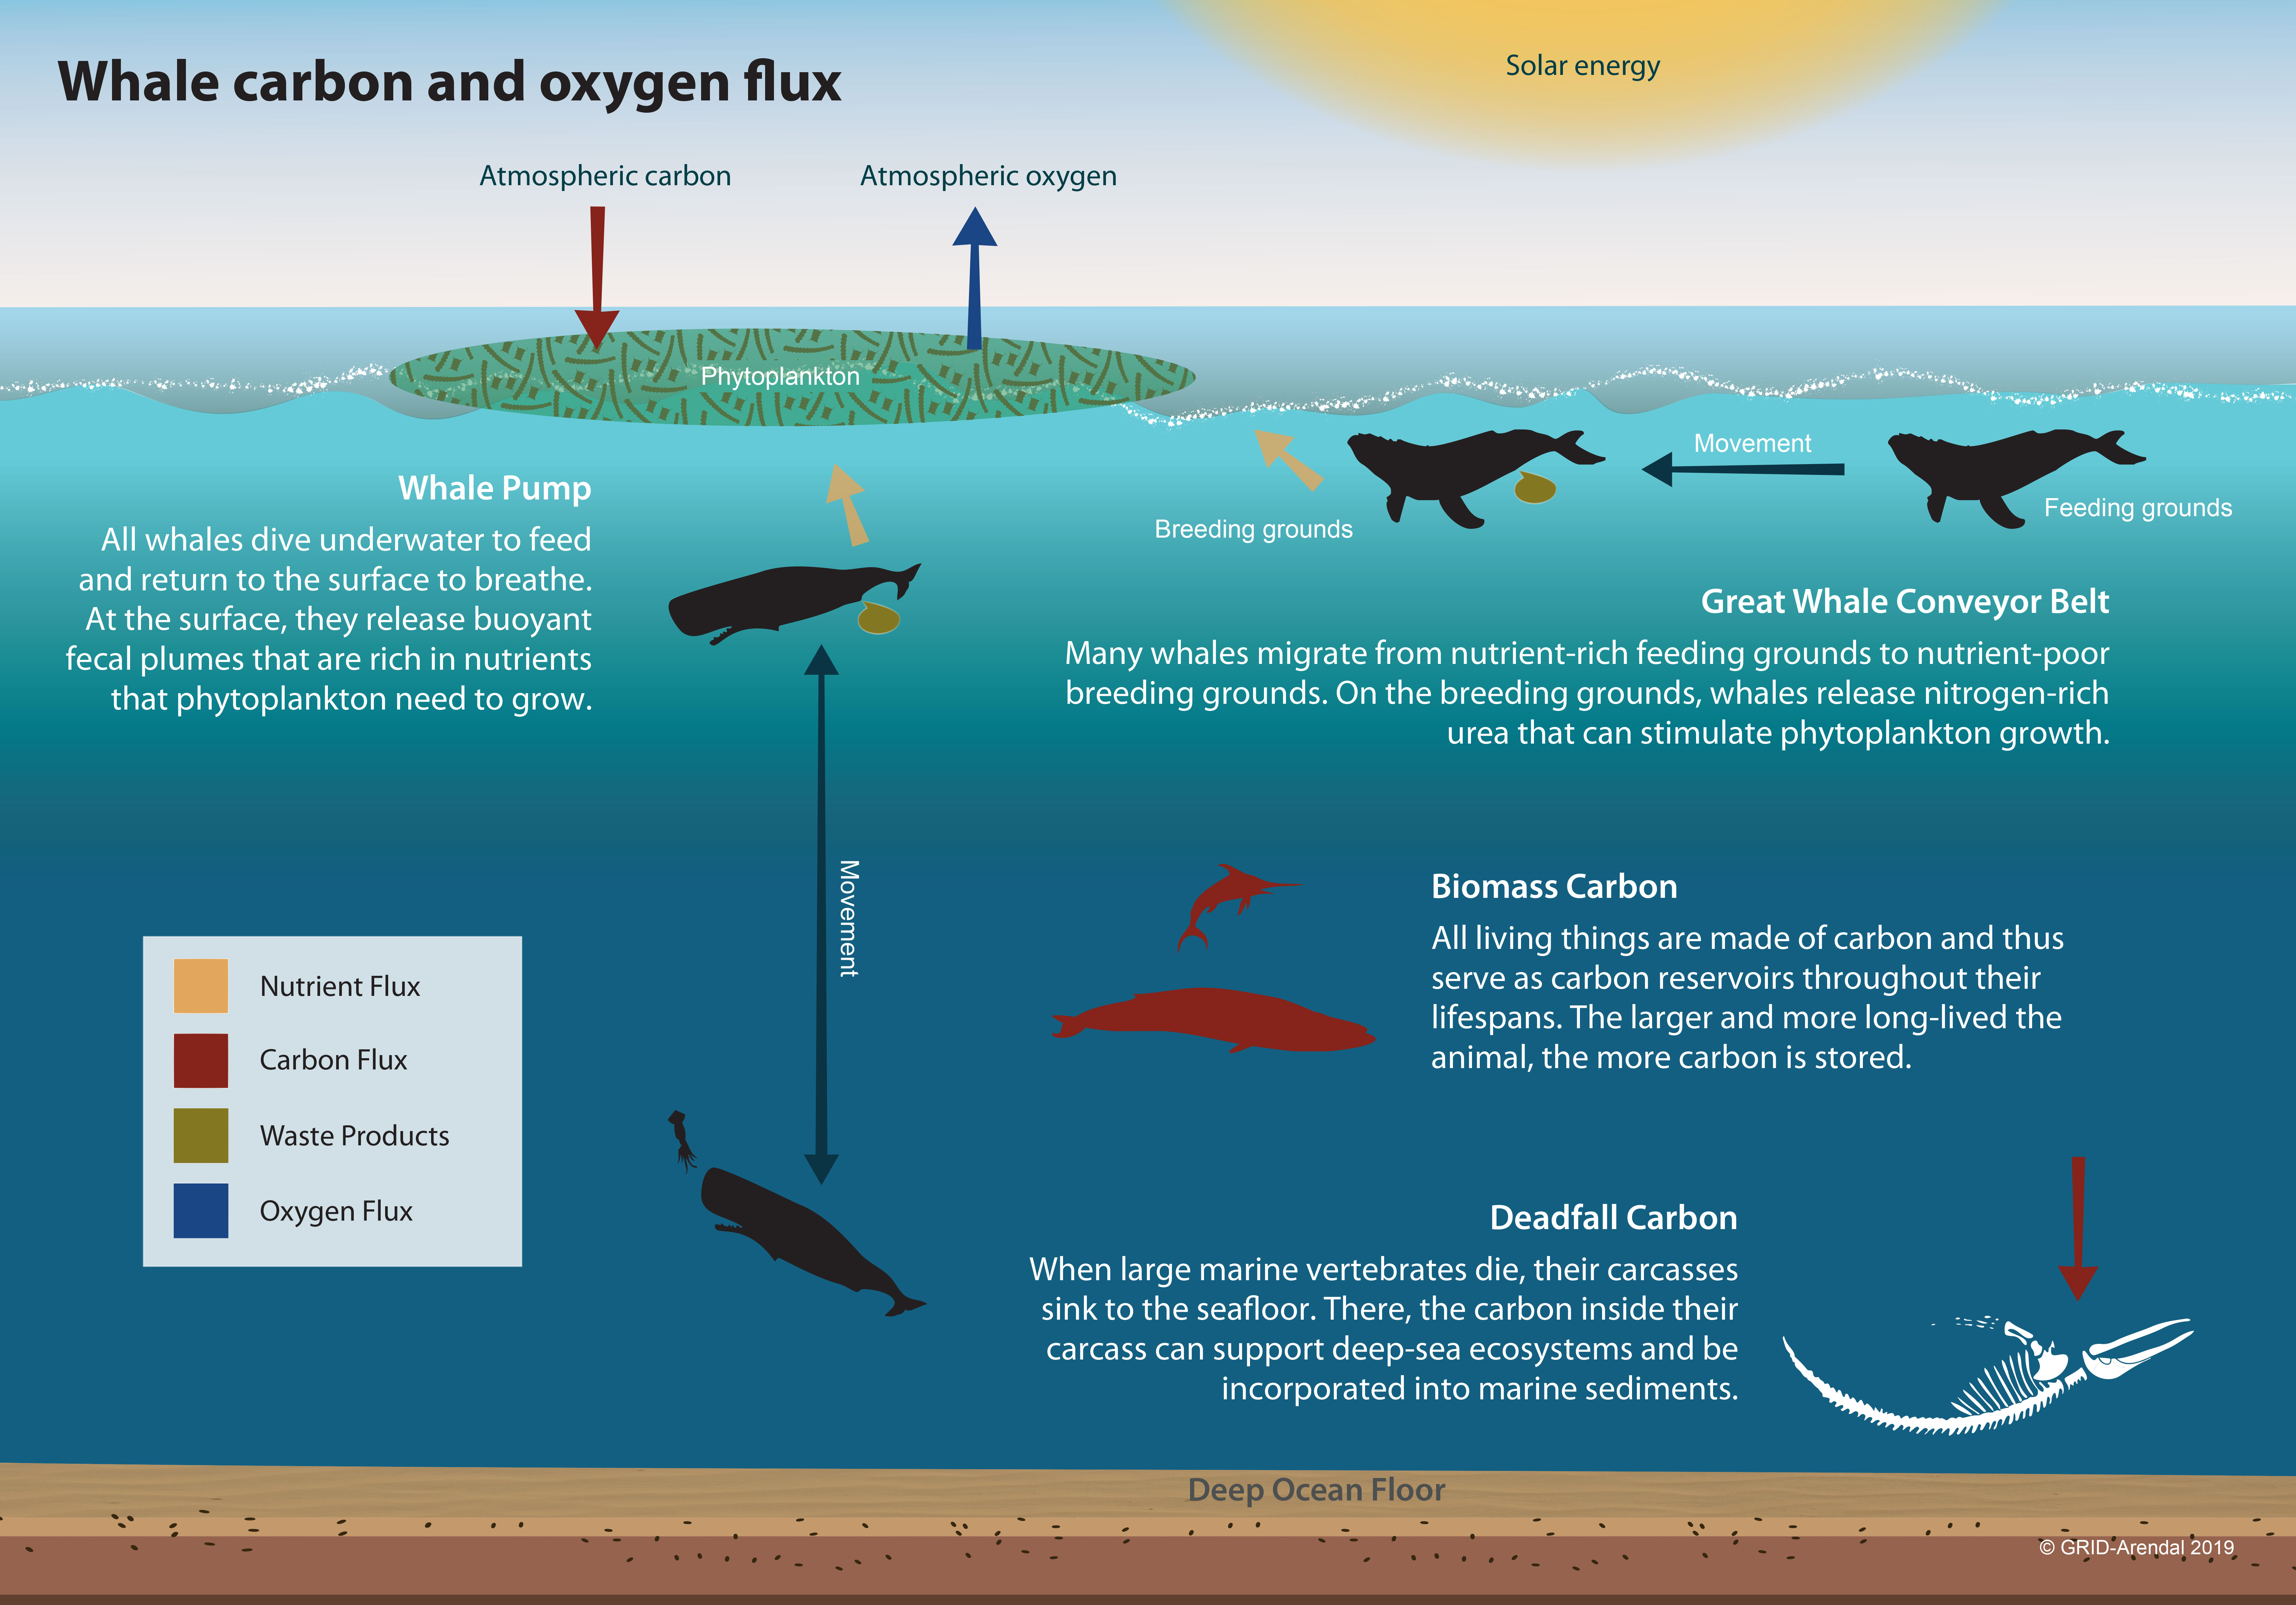 Wherever whales, the largest living things on earth, are found, so are populations of some of the smallest, phytoplankton. These microscopic creatures not only contribute at least 50 percent of all oxygen to our atmosphere, they do so by capturing about 37 billion metric tons of CO2, an estimated 40 percent of all CO2 produced. To put things in perspective, IMF calculates that this is equivalent to the amount of CO2 captured by 1.70 trillion trees—four Amazon forests’ worth—or 70 times the amount absorbed by all the trees in the US Redwood National and State Parks each year. More phytoplankton means more carbon capture.